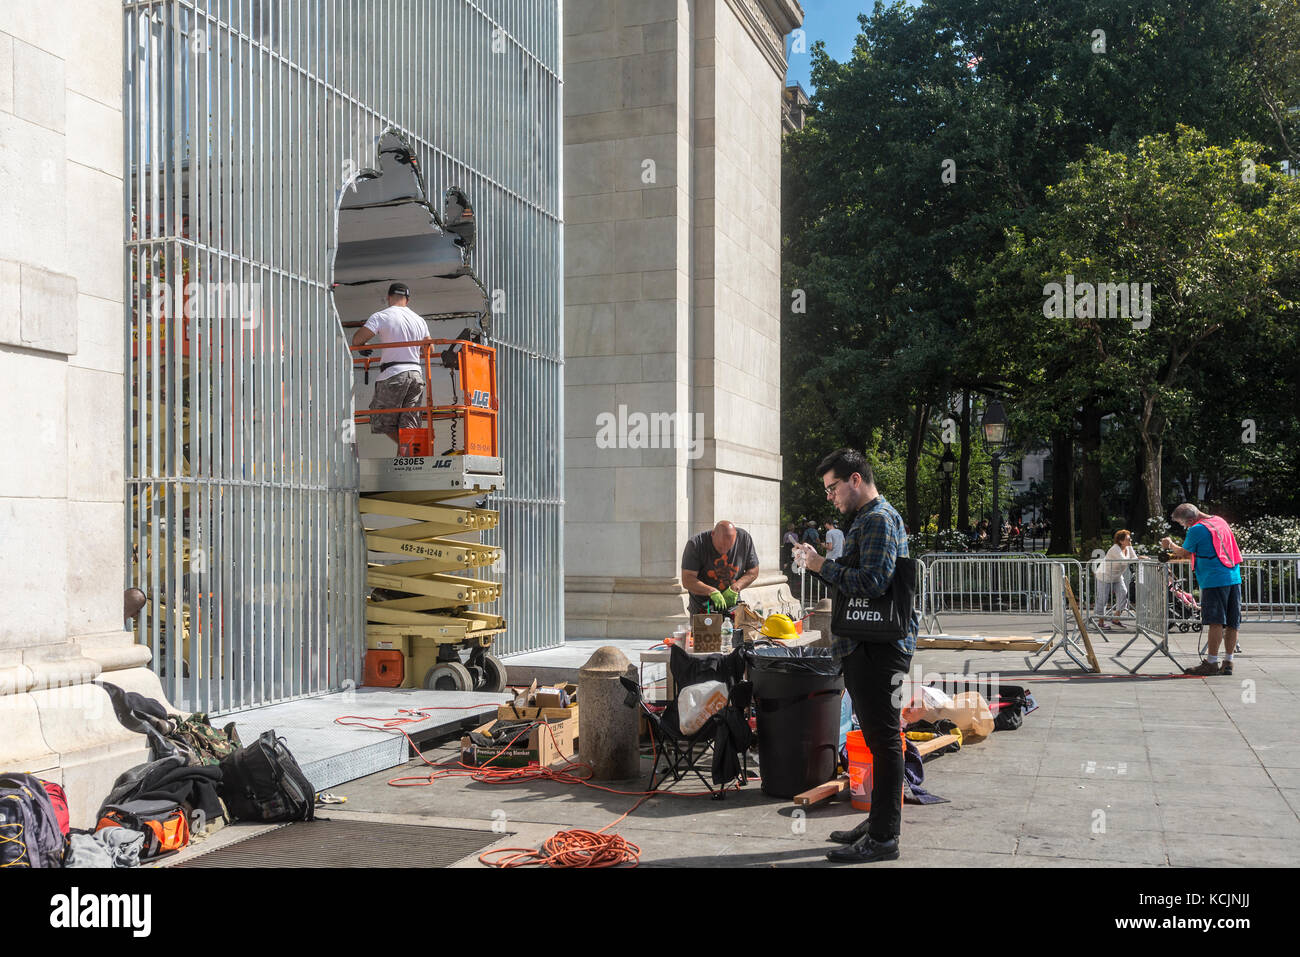 New York, USA. 5th Oct, 2017. Construction continues for Ai Weiwei's sculptural installation 'Good Fences Make Good Neighbors.' The installation 300 sculptures at various locations throughout New York City which opens 12 Oct is slated to run through February, in conjunction with the Public Art Fund's 40 anniversary. According to Chinese dissident and human rights activist Ai Weiwei, the work is Inspired by the international migration crisis and current global geopolitical landscape Credit: Stacy Walsh Rosenstock/Alamy Live News Stock Photo